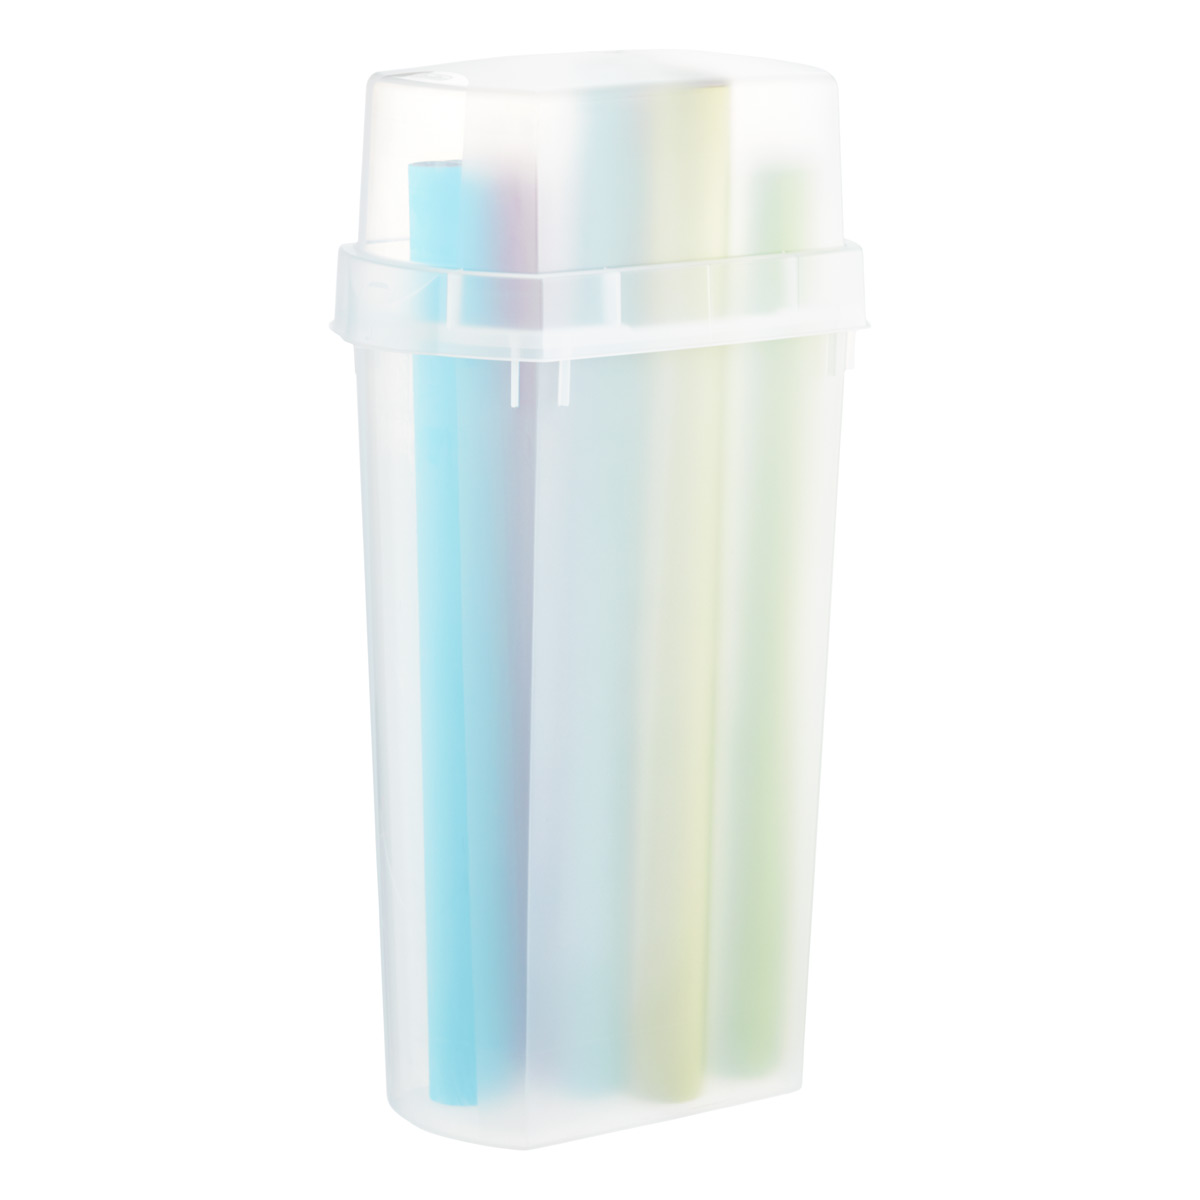 Wrapping Paper & Gift Wrap Storage Container: Ideal For Long Rolls